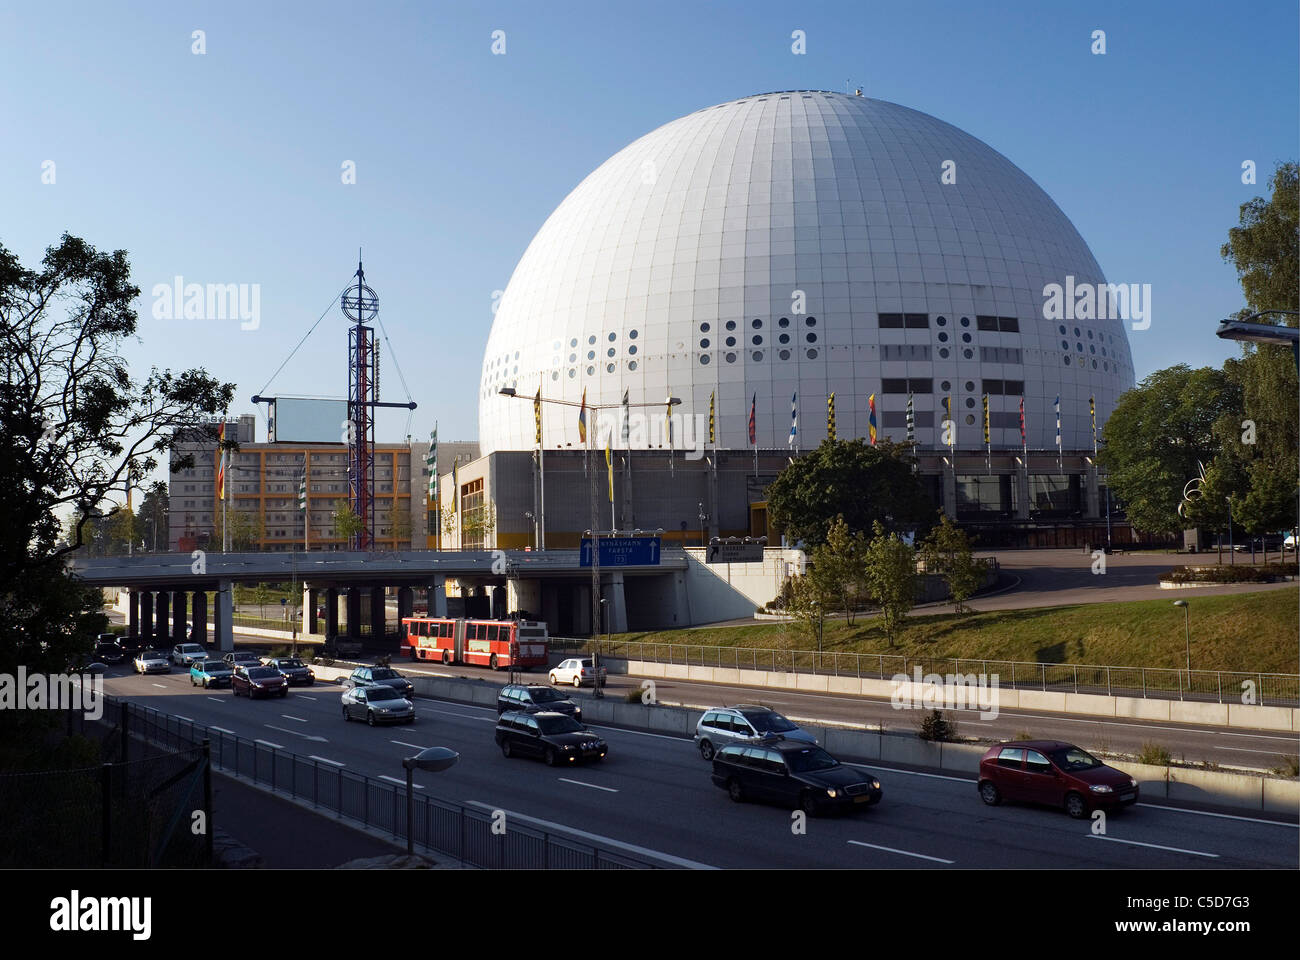 The globe against clear blue sky with urban road in the foreground at Stockholm, Sweden Stock Photo